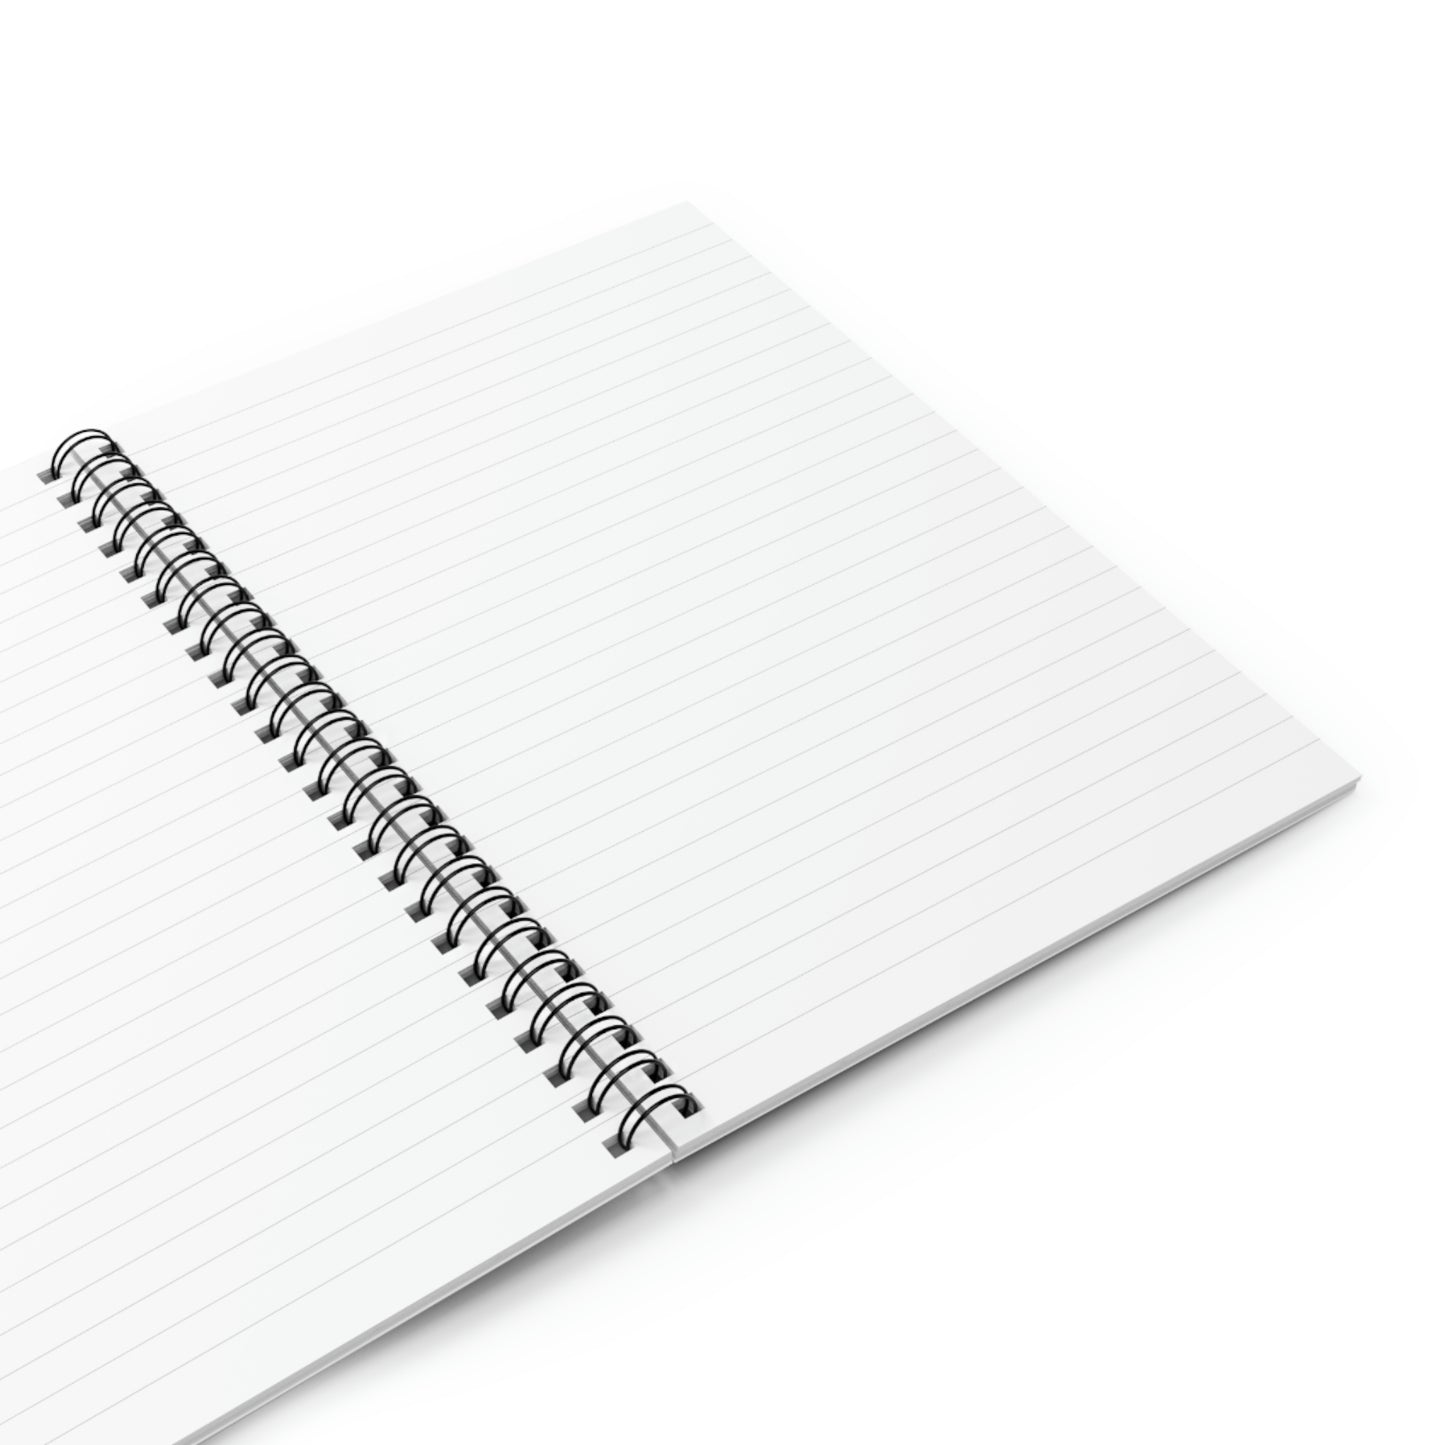 CIRCULAR ECONOMY - Spiral Notebook - Ruled Line - White Cover